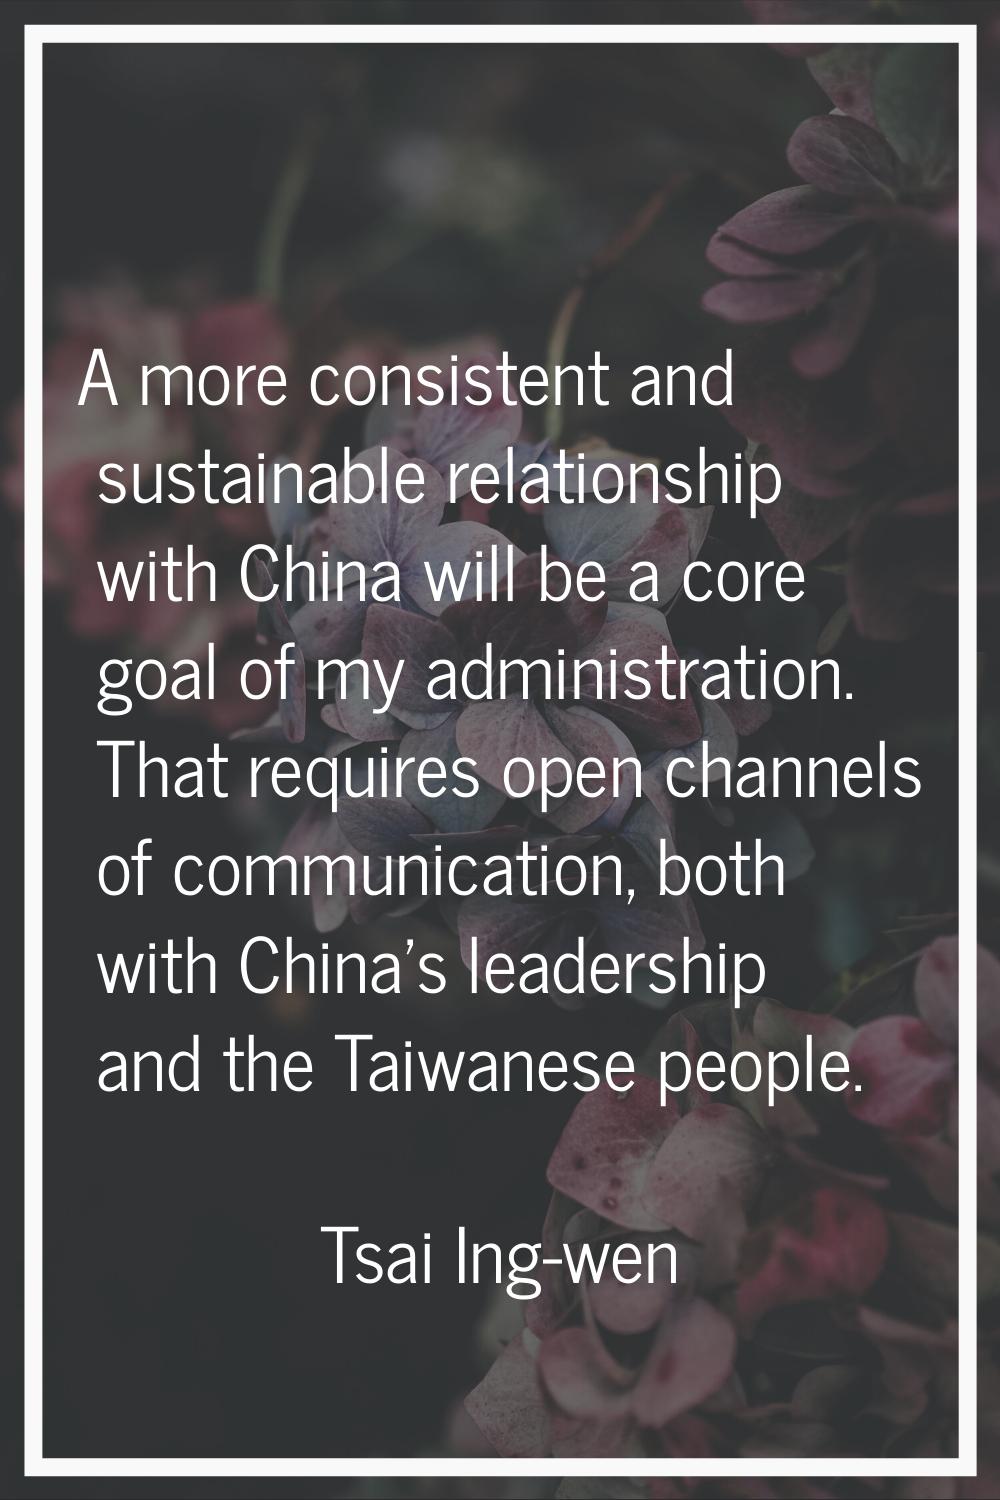 A more consistent and sustainable relationship with China will be a core goal of my administration.